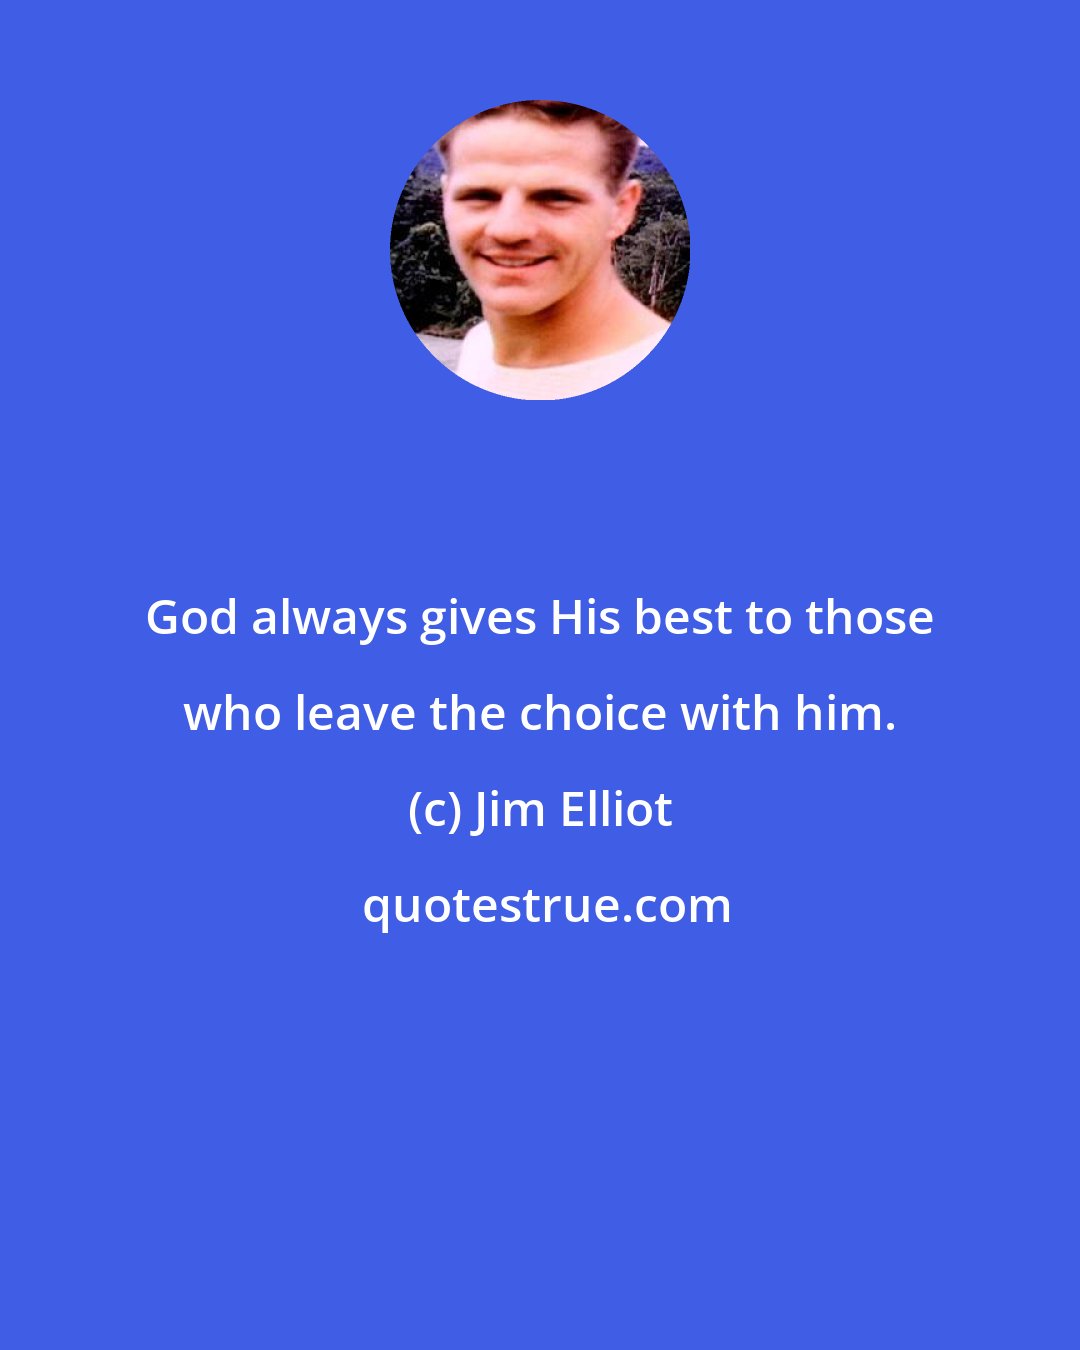 Jim Elliot: God always gives His best to those who leave the choice with him.